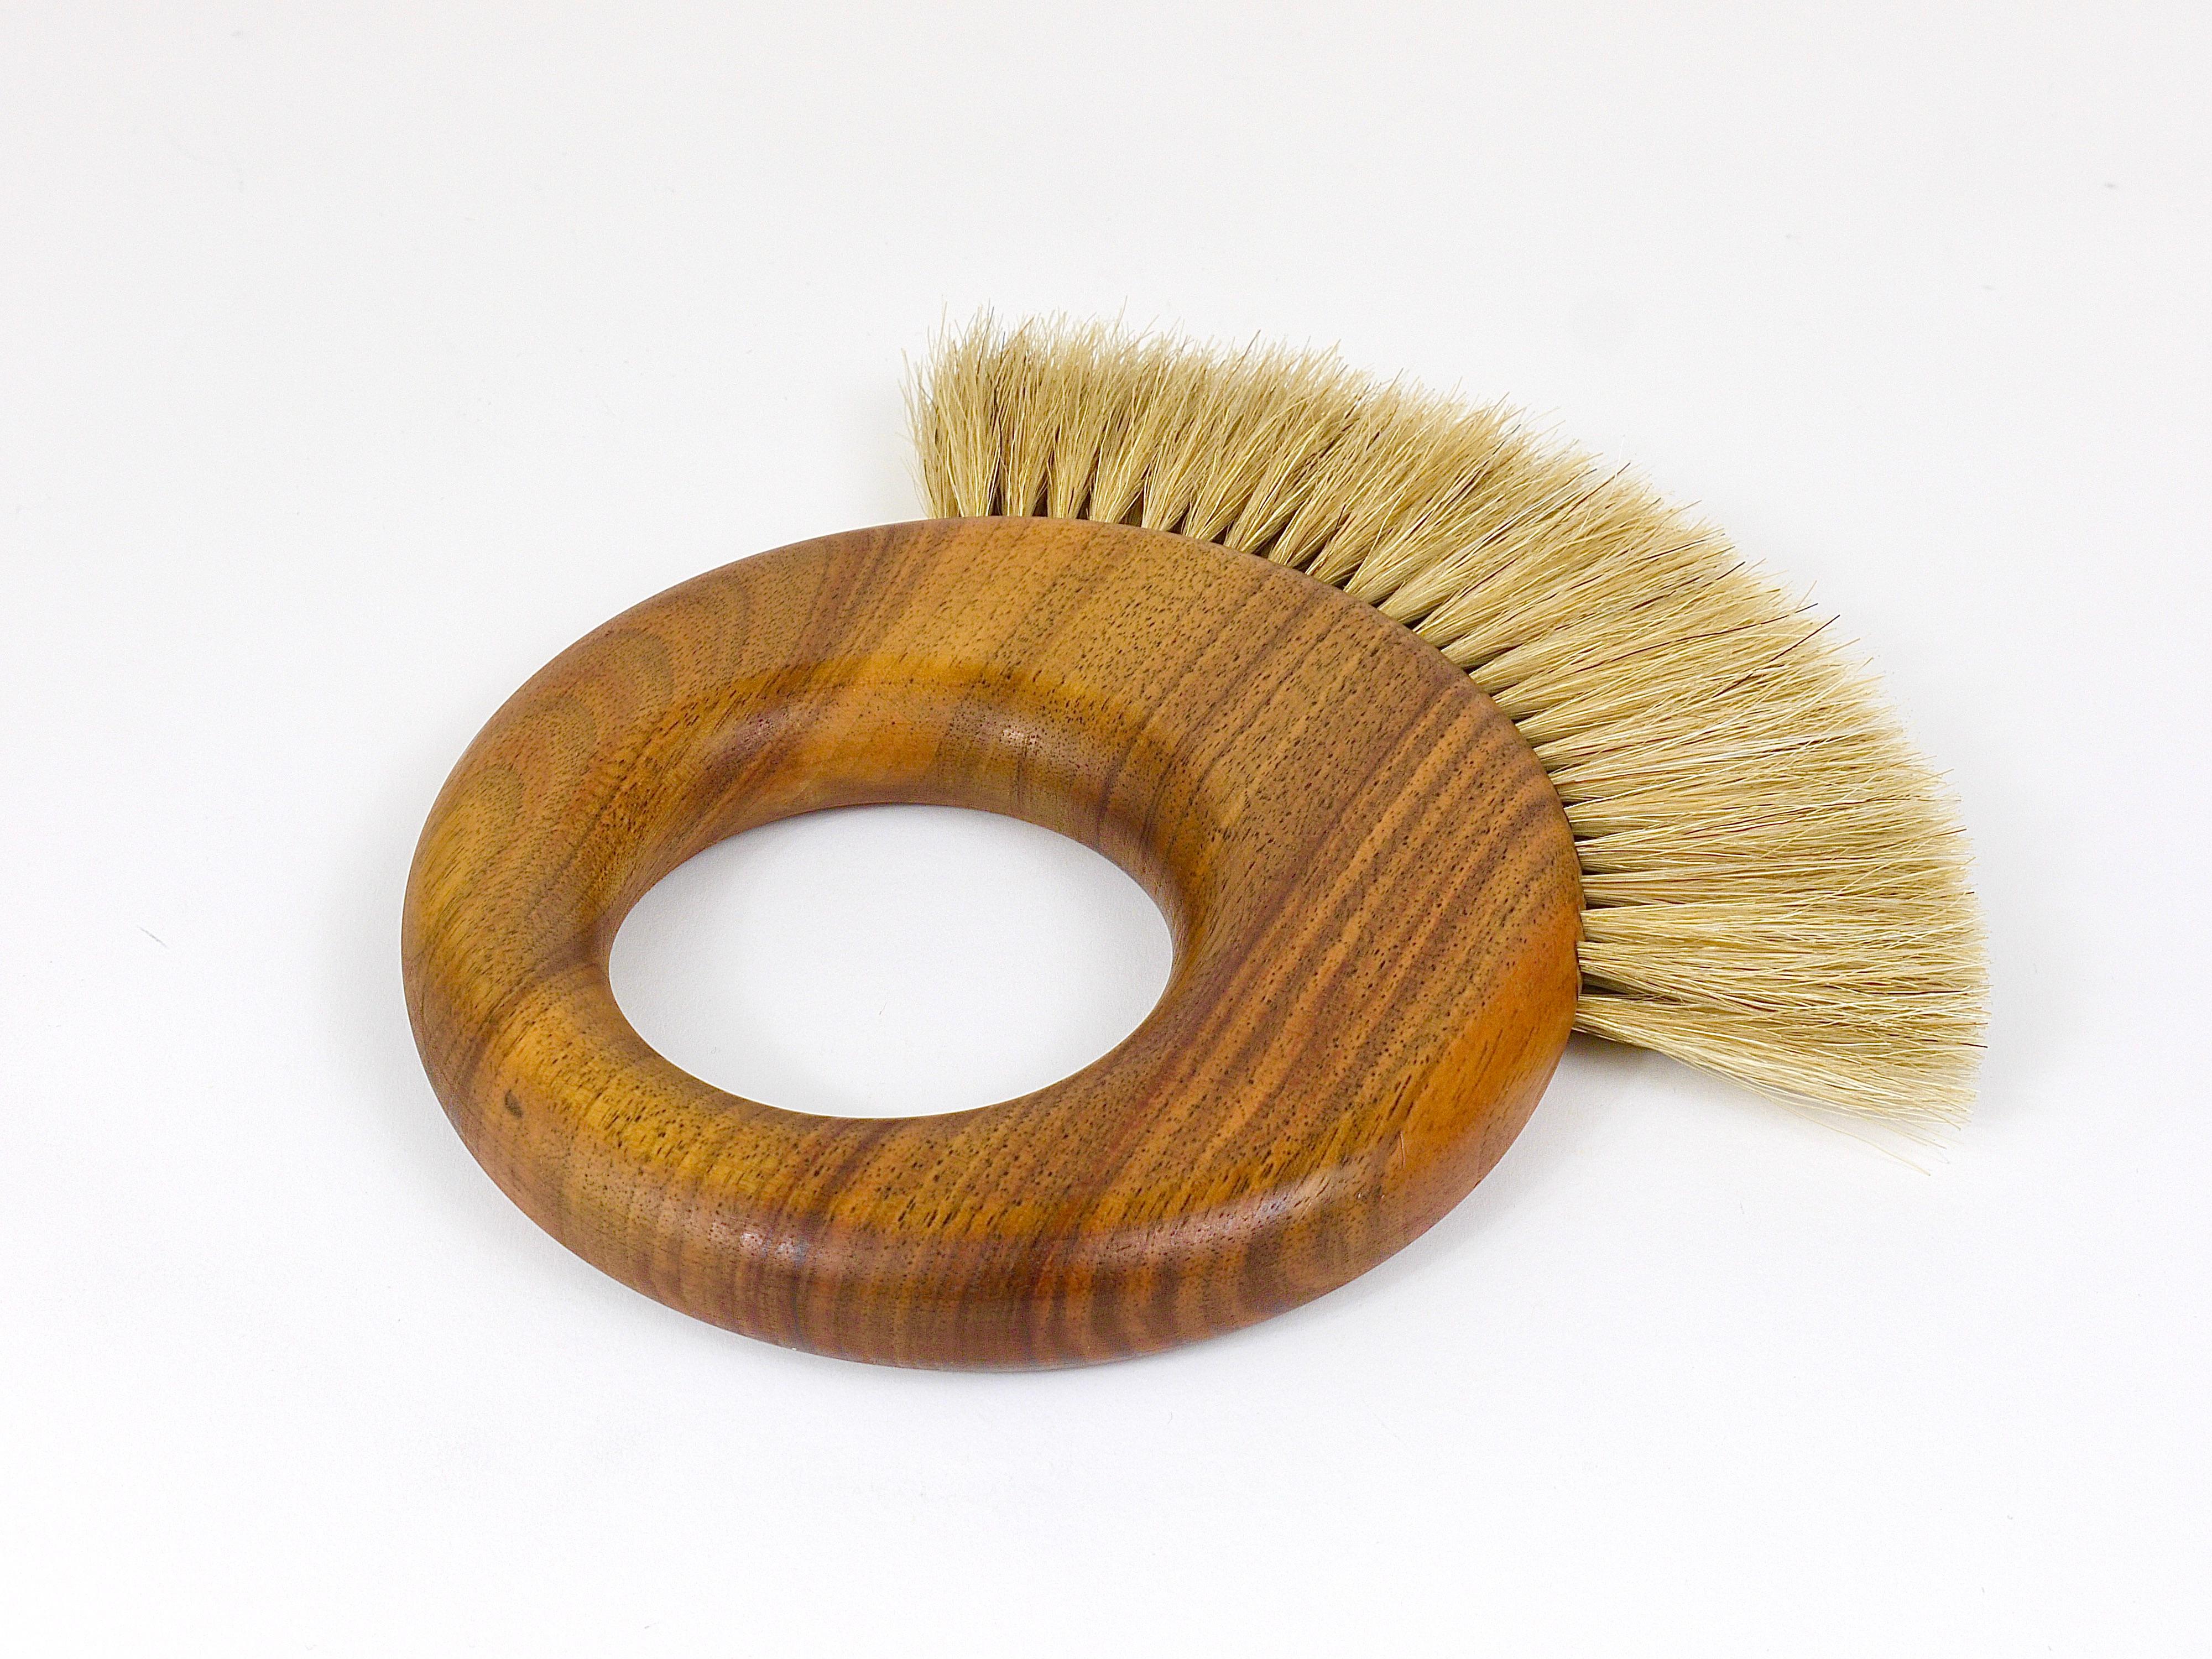 Large Carl Aubock Midcentury Walnut Ring Clothes Brush, Austria, 1950s For Sale 3